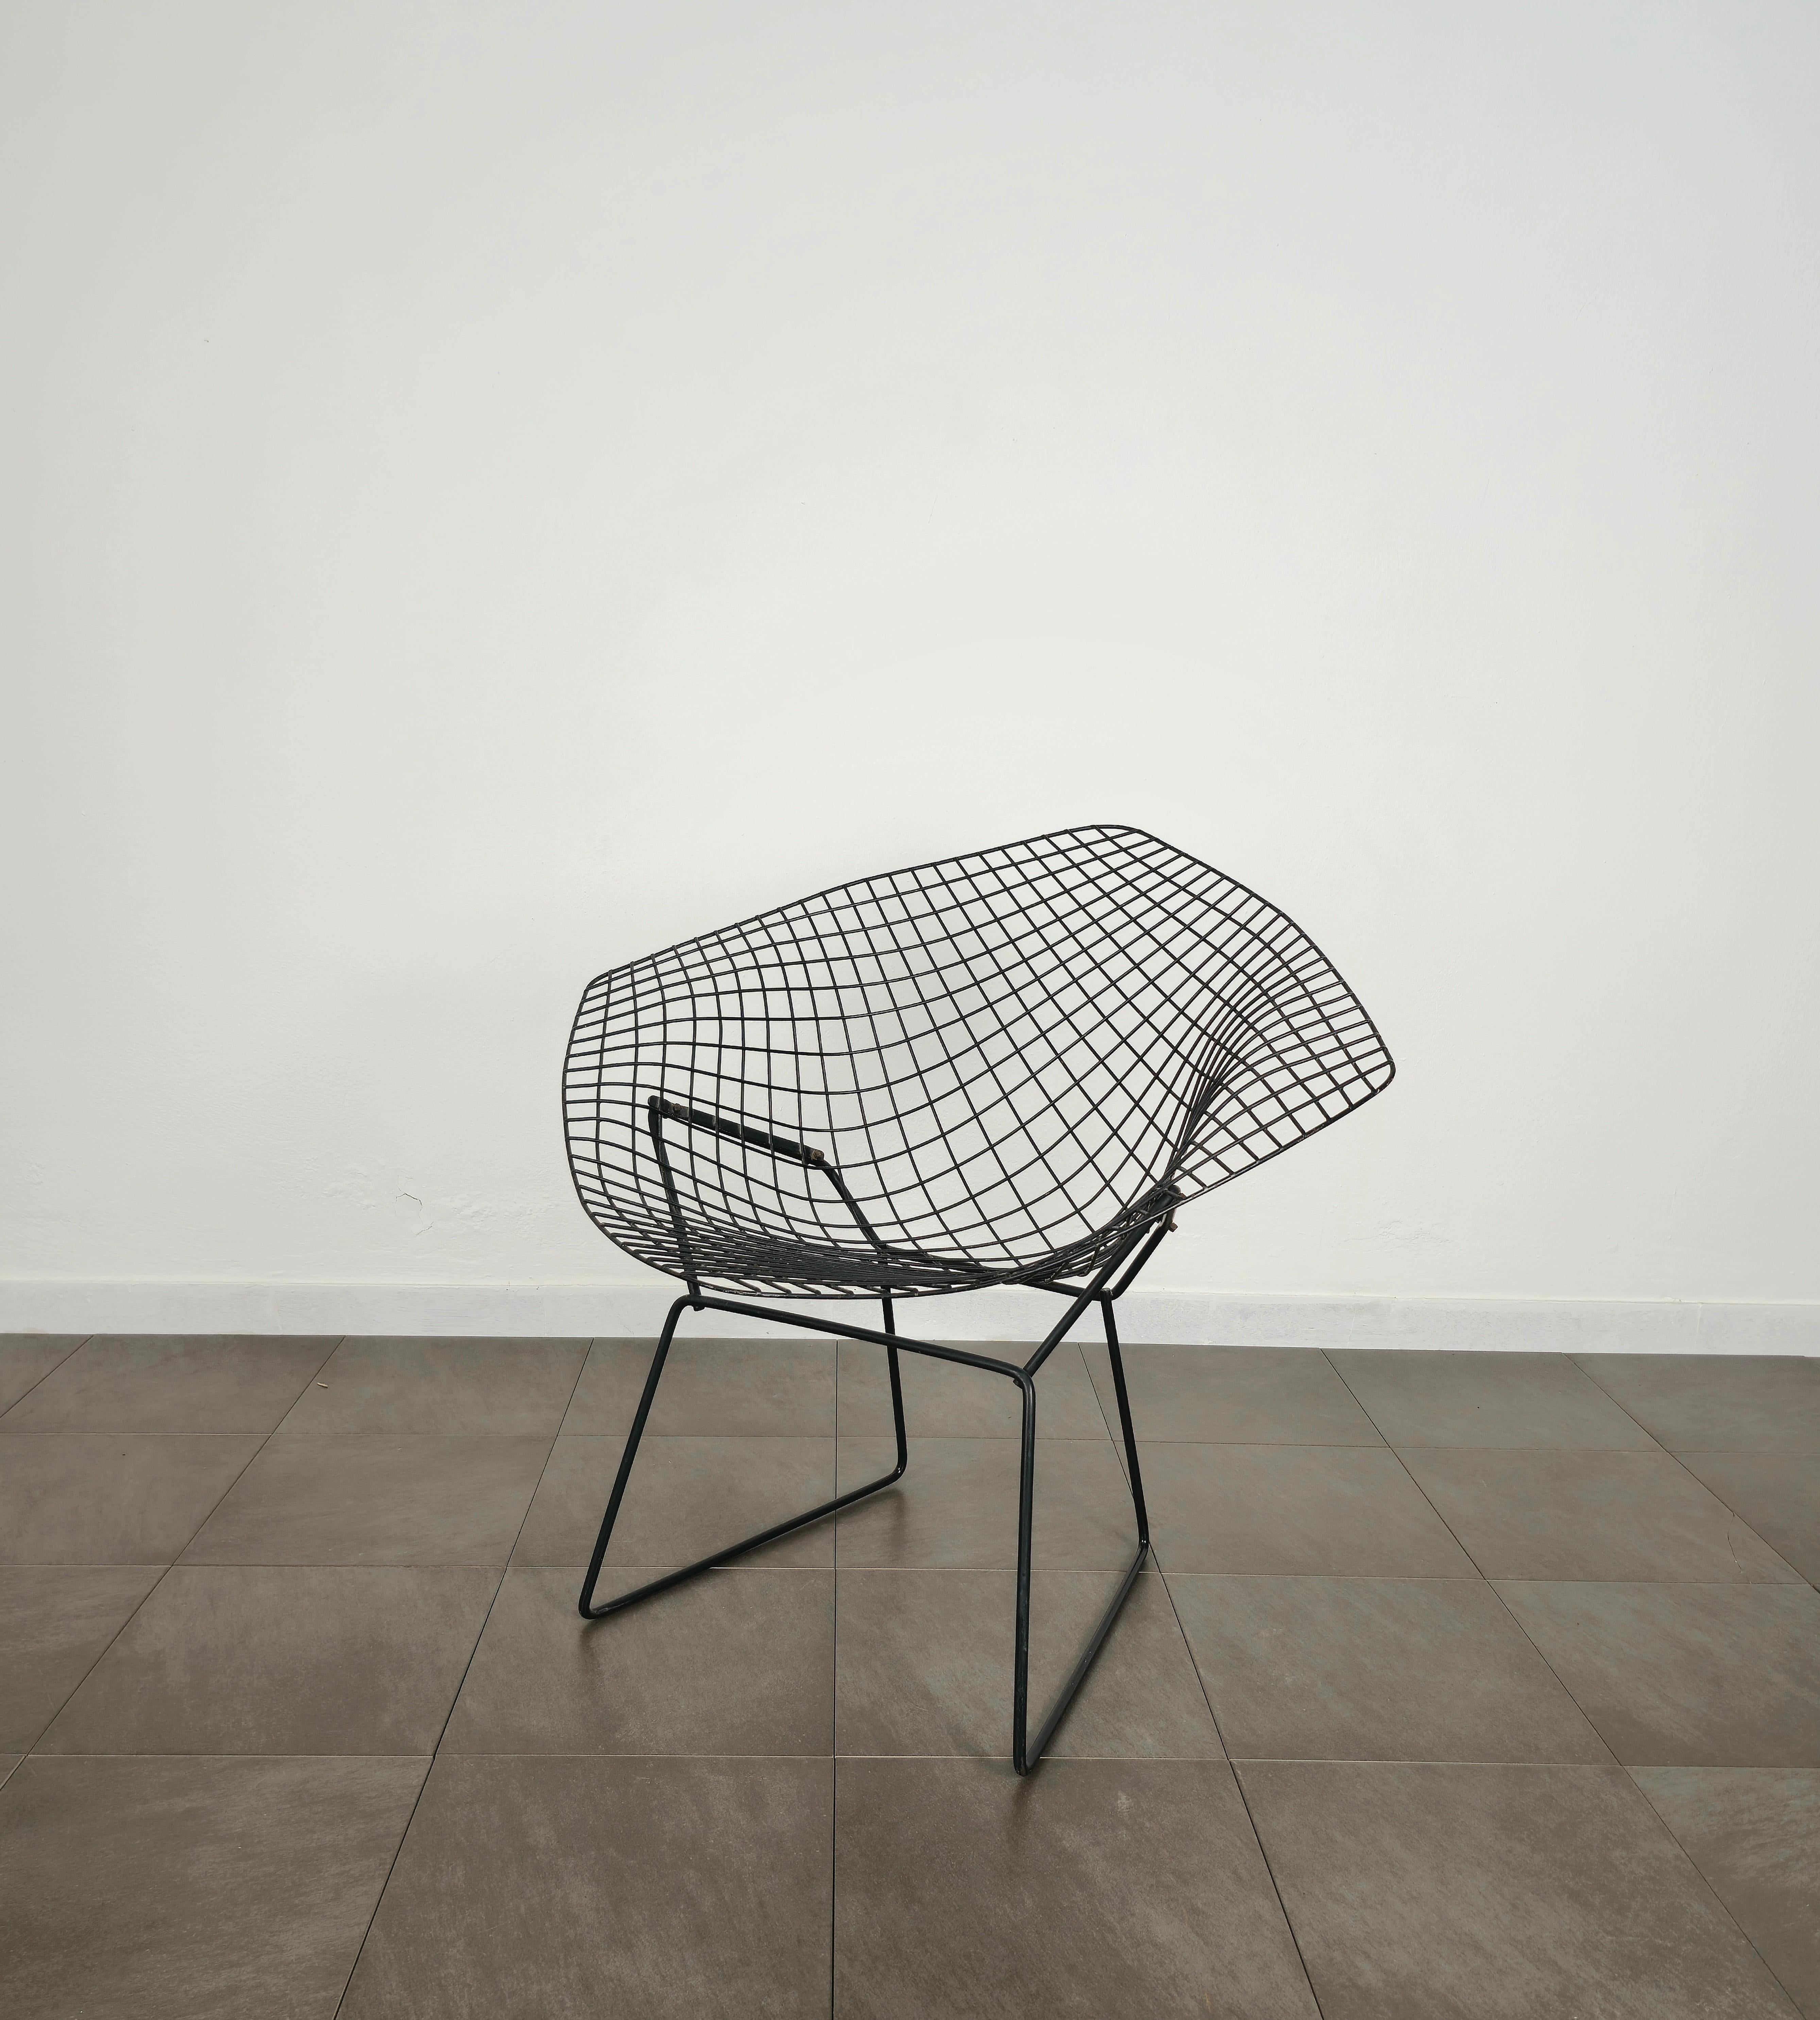 Chair or armchair designed by the designer Harry Bertoia and produced in the United States in the 70s by Knoll international.
The sculptural armchair/chair was made of black enamelled metal and takes the name of 